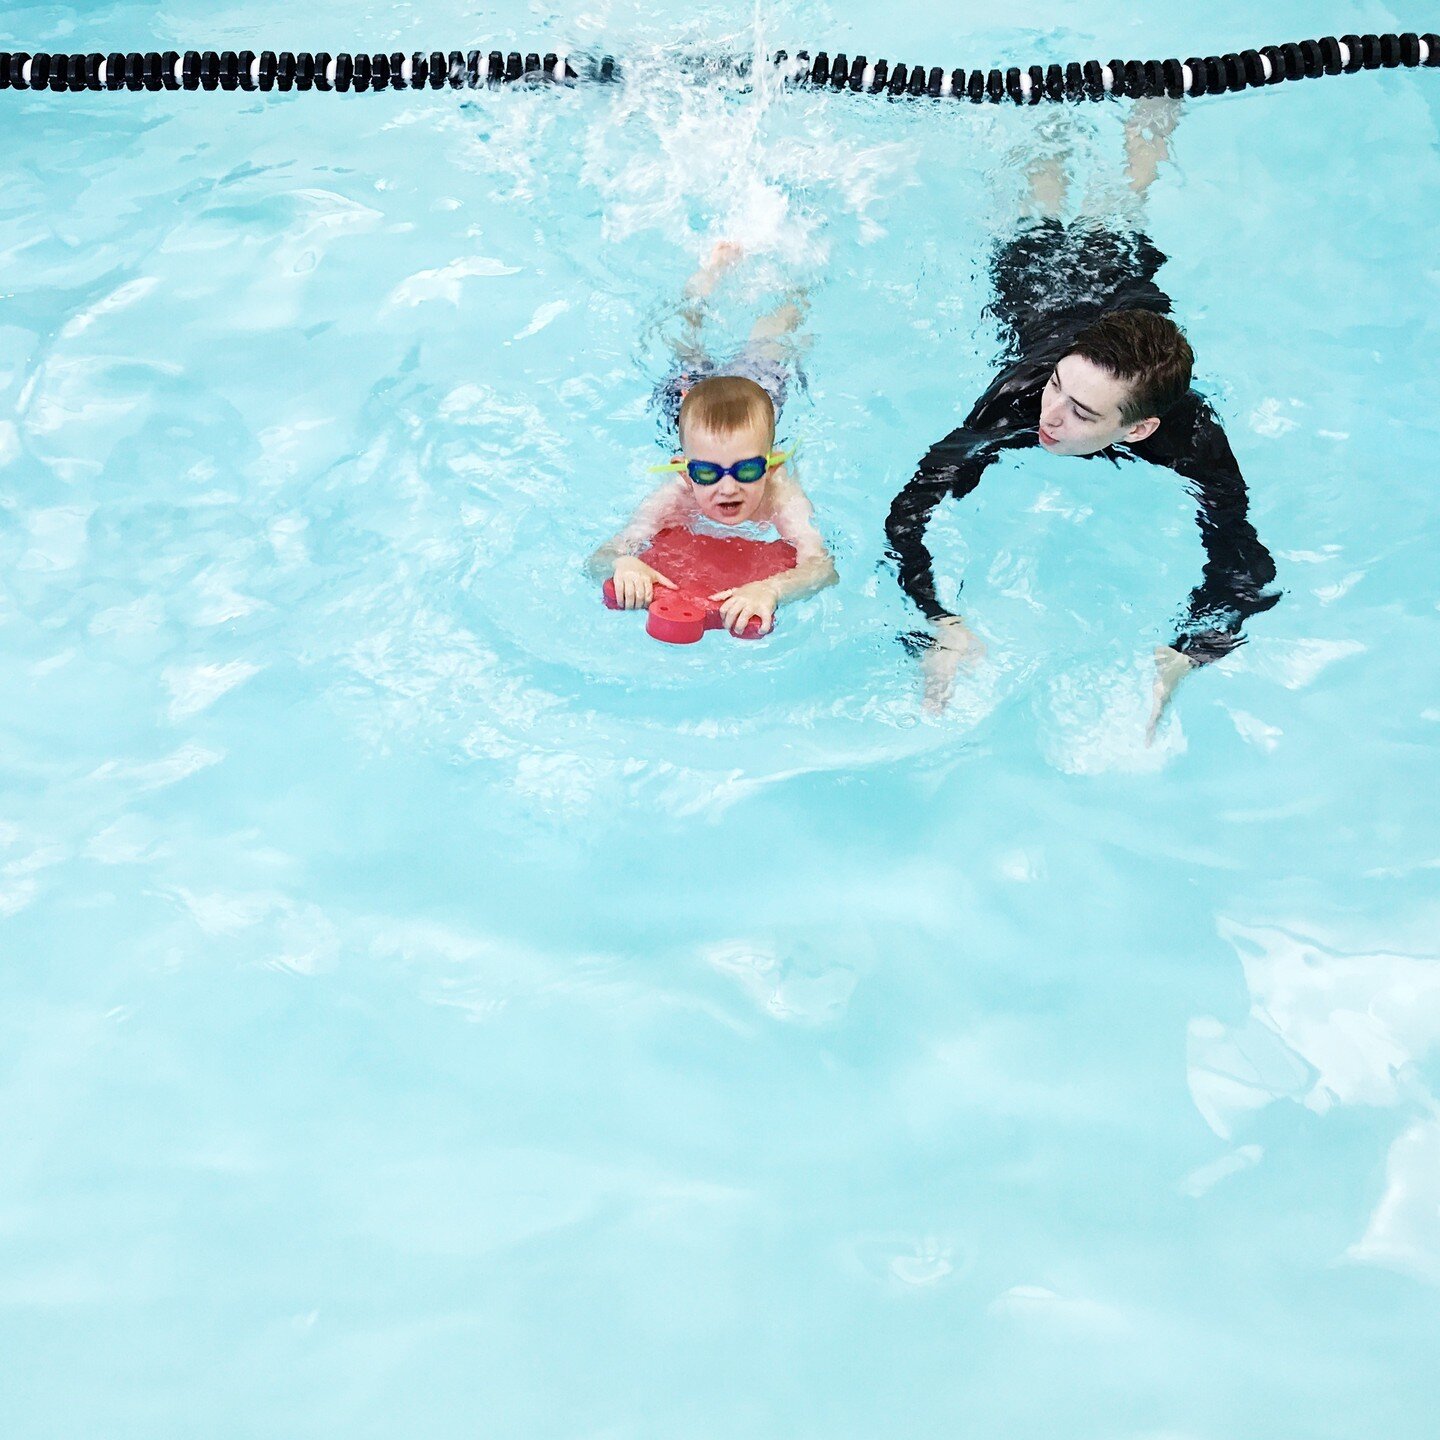 It&rsquo;s never too early for swim lessons! Your child can start learning the fundamentals of swim safety as young as 6 months old. 👶🏊